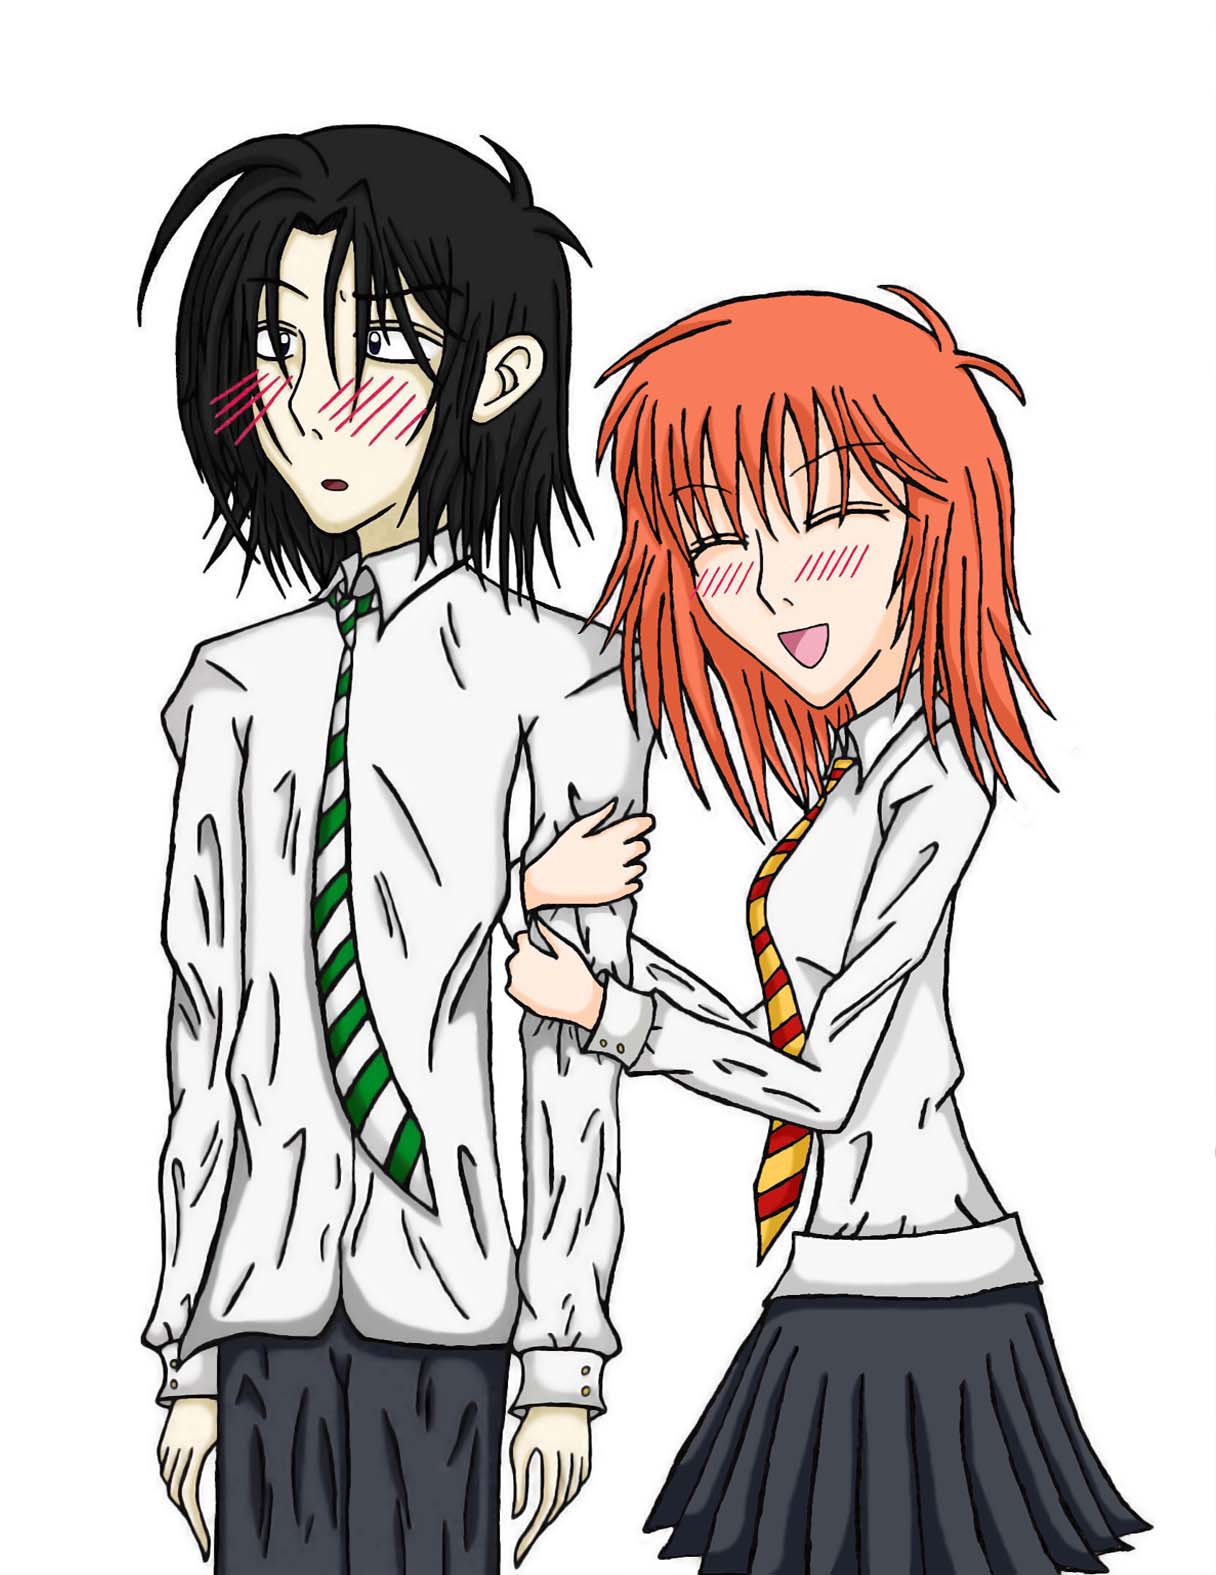 severus snape and lily evans anime